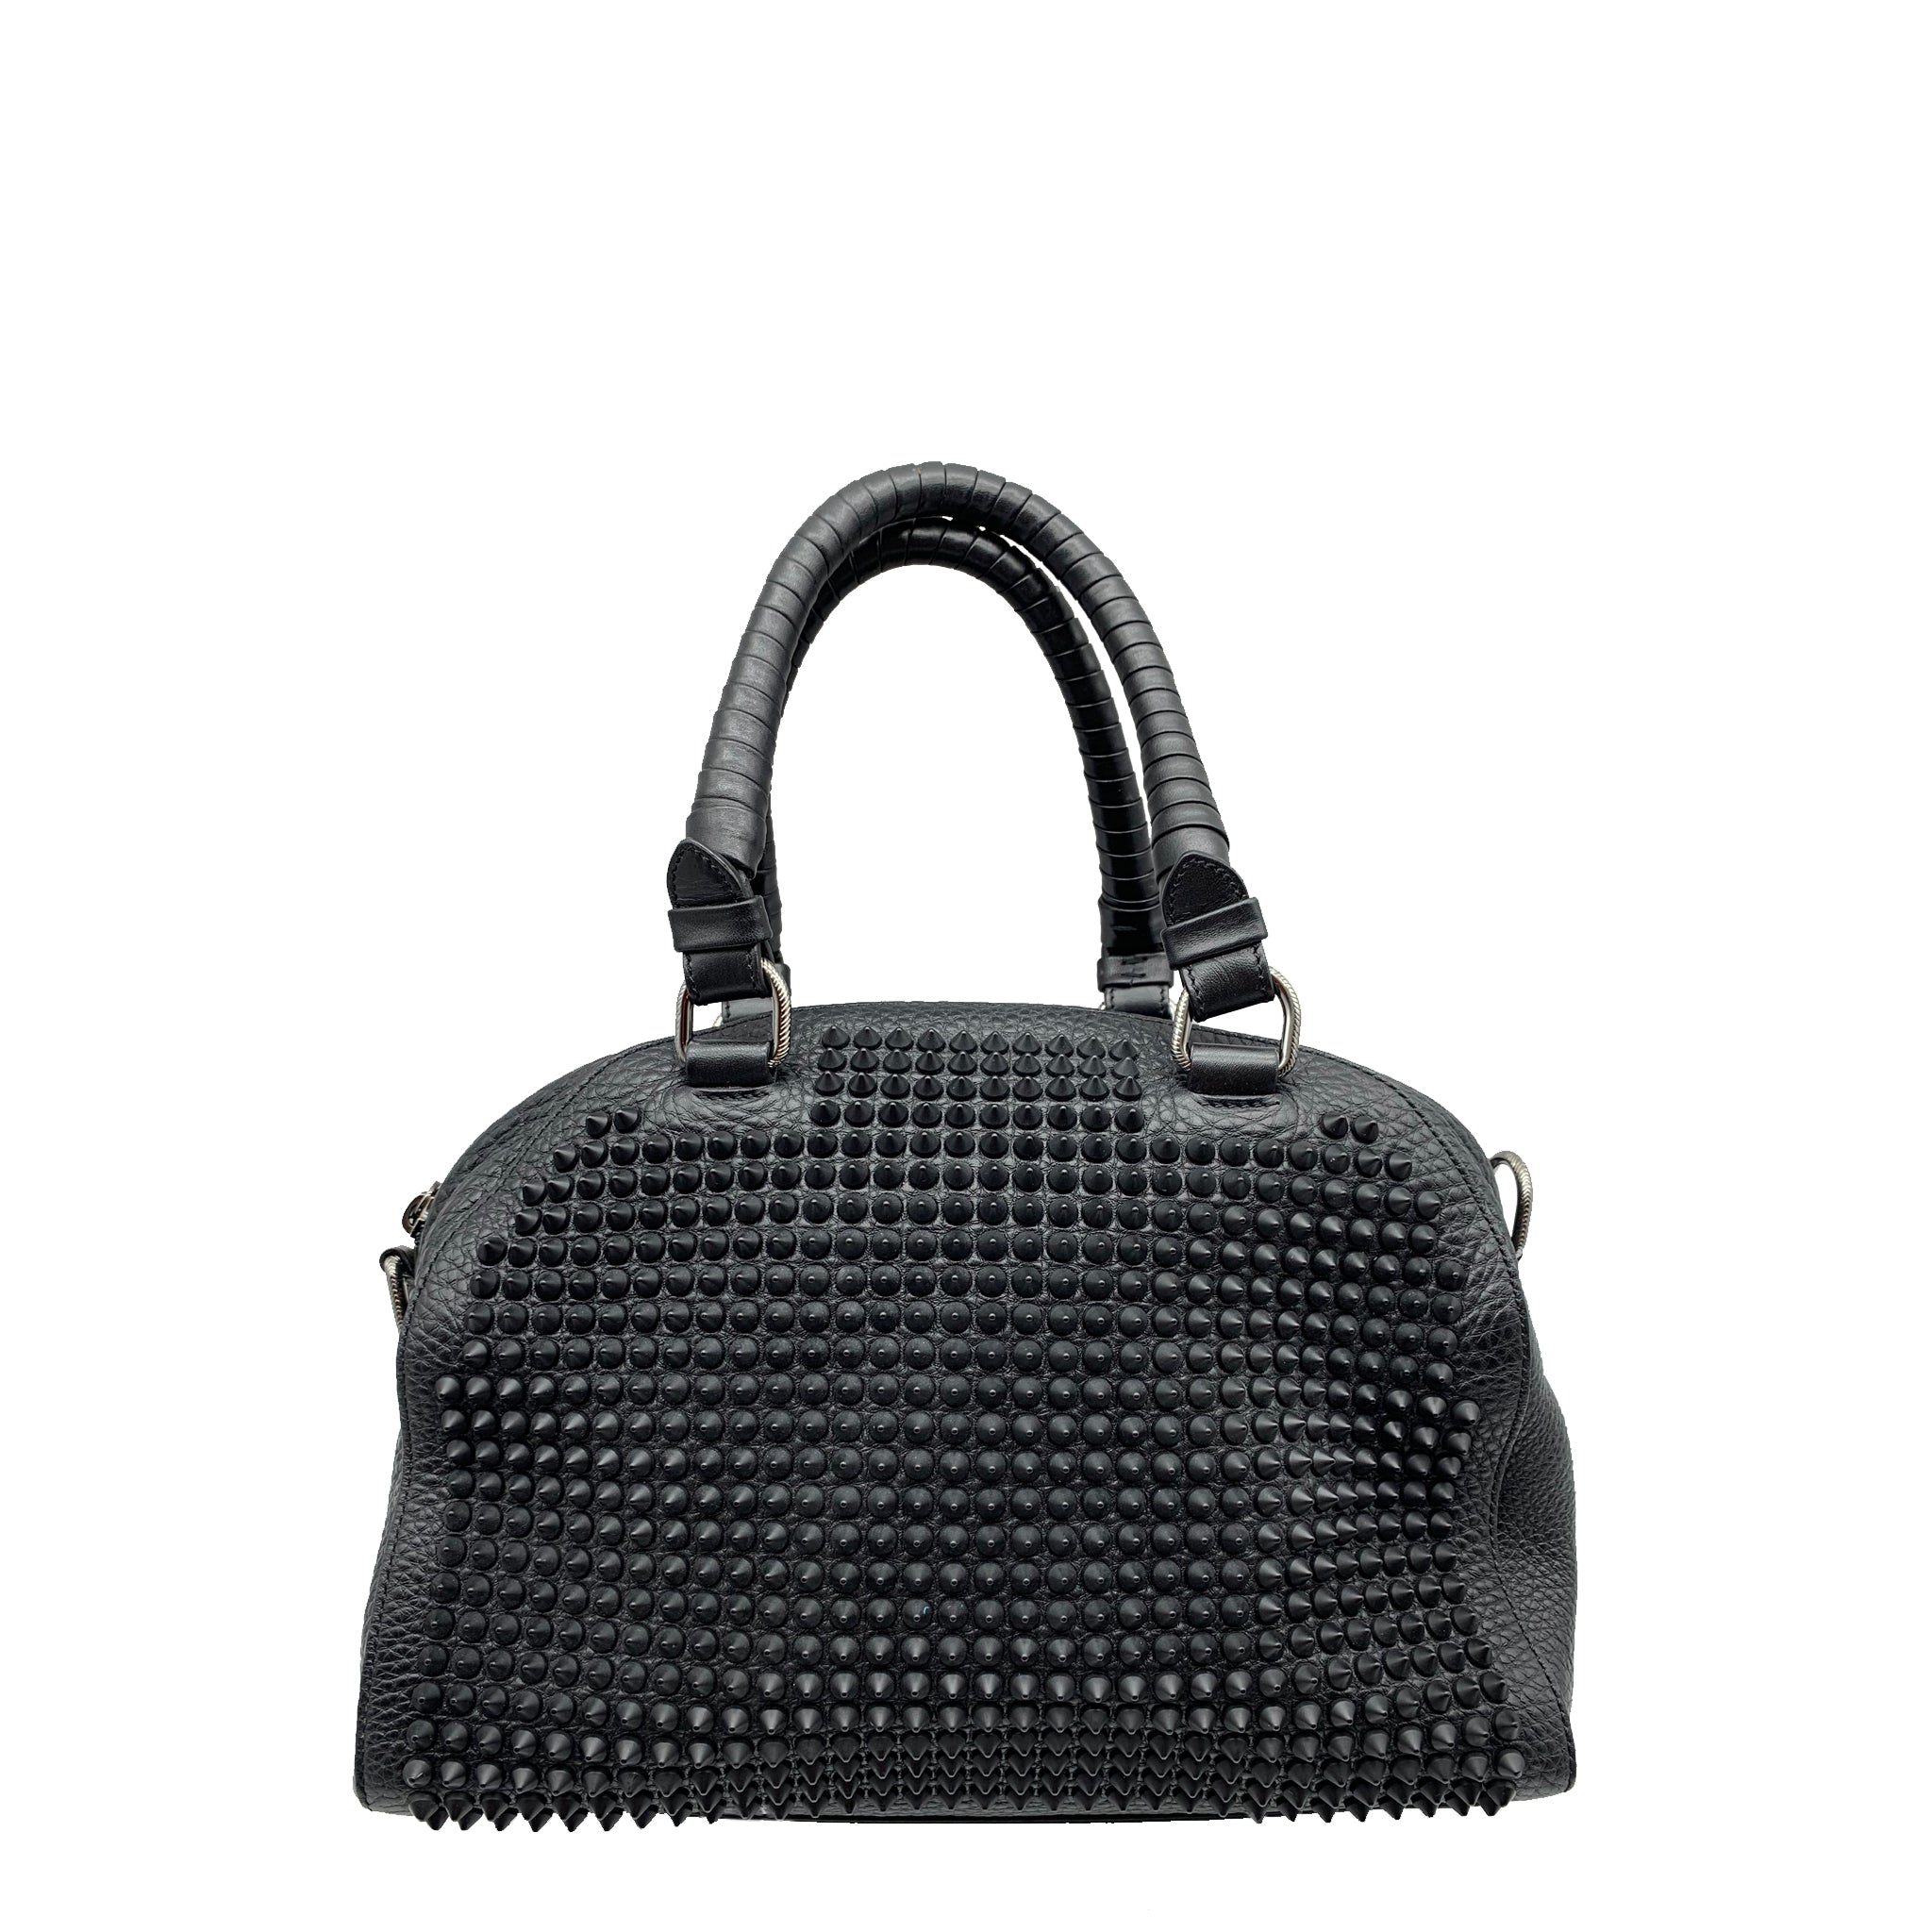 ‘Sold’ CHRISTIAN LOUBOUTIN Panettone Black Pebbled Leather Spike Studd ...